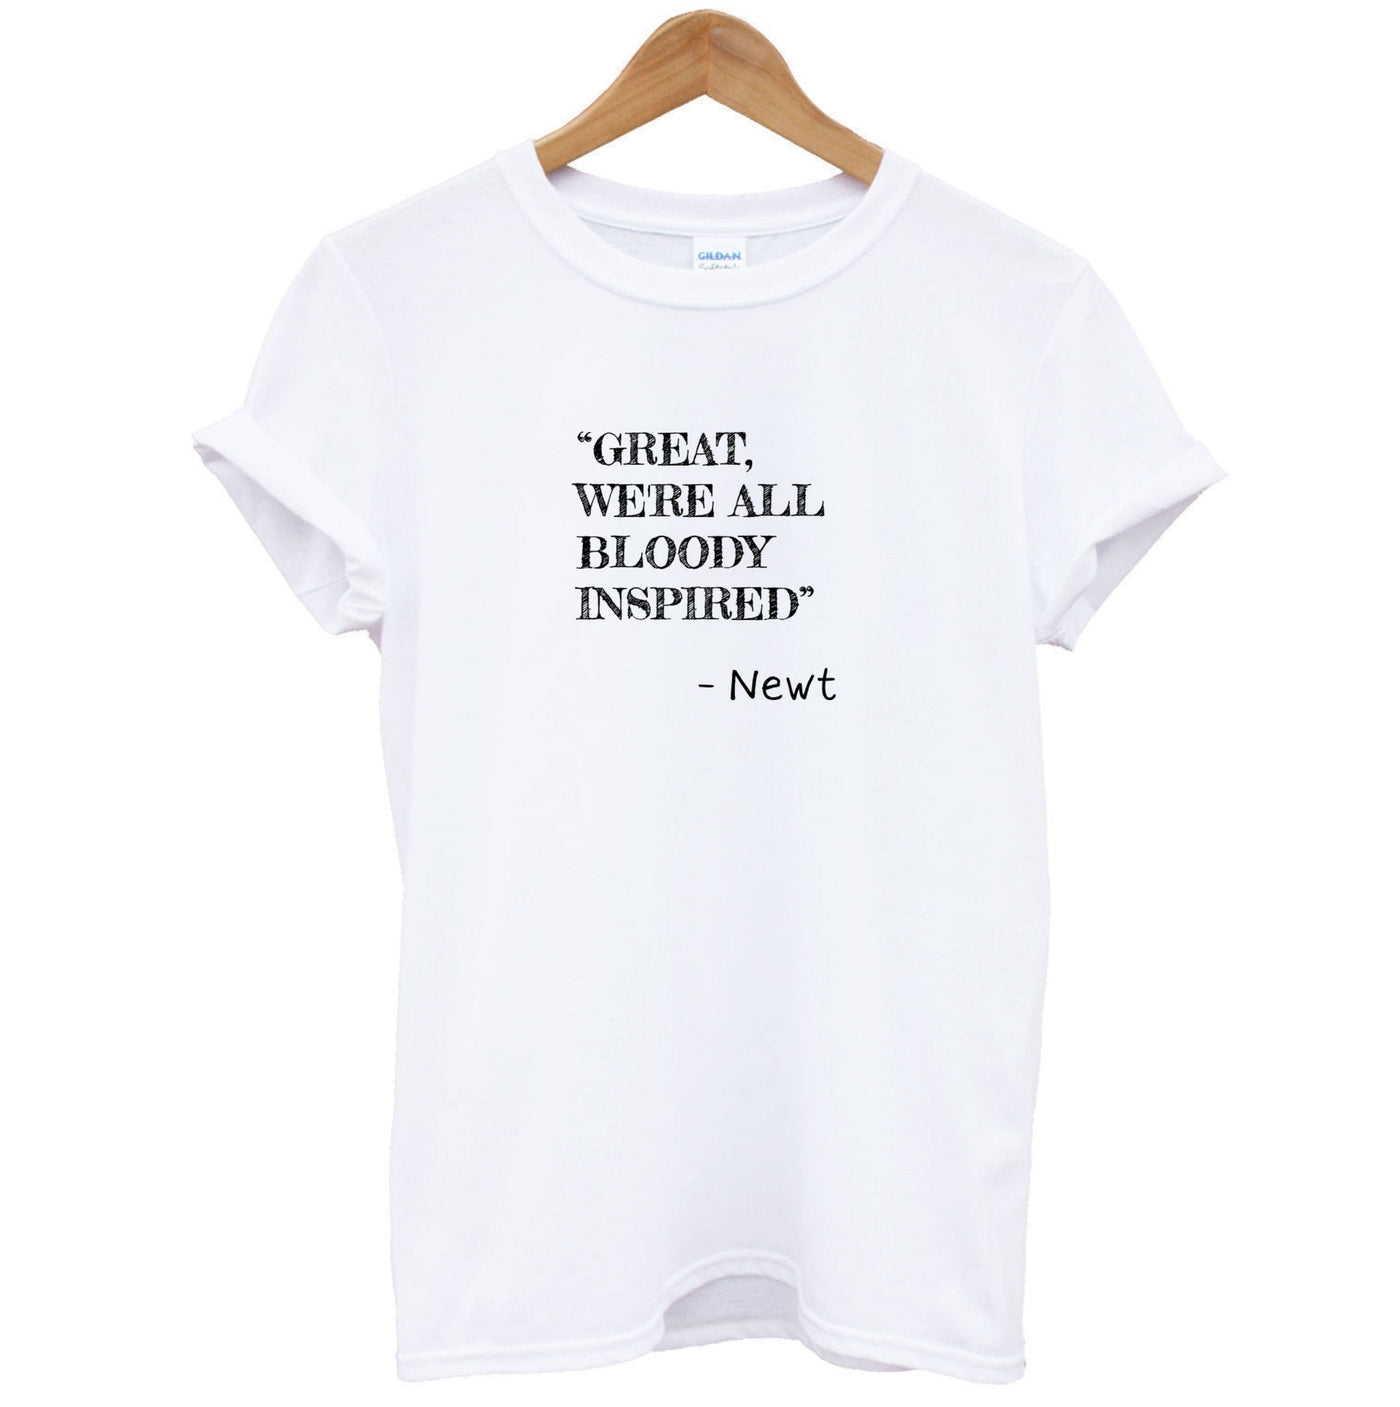 Great, We're All Bloody Inspired - Newt T-Shirt